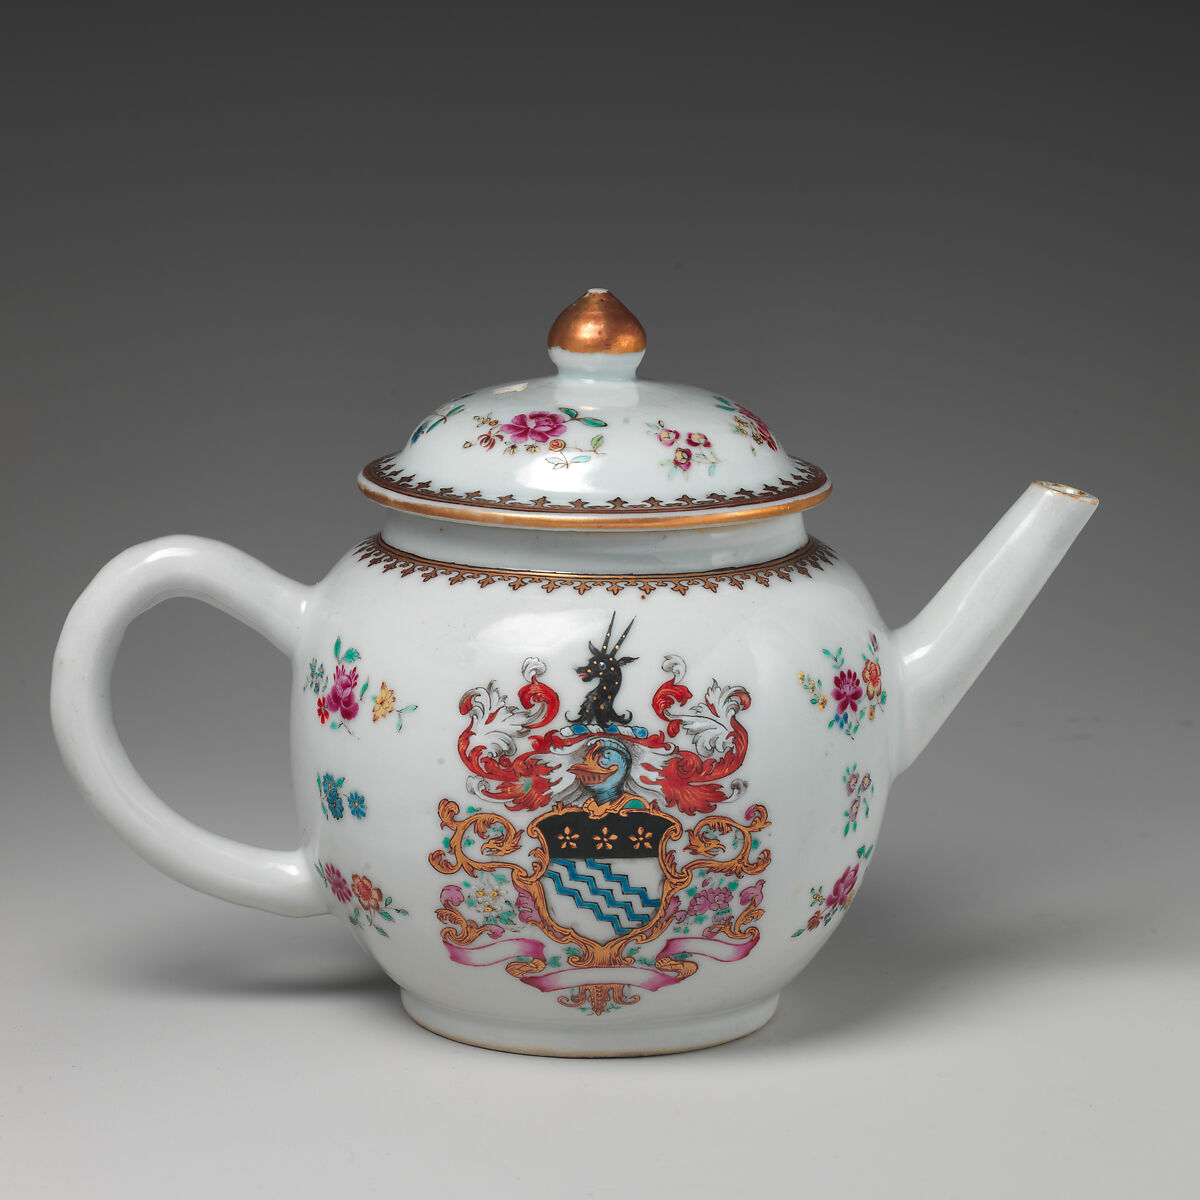 Teapot with armorial decoration (part of a service), Hard-paste porcelain with enamel decoration and gilding, Chinese, for British market 